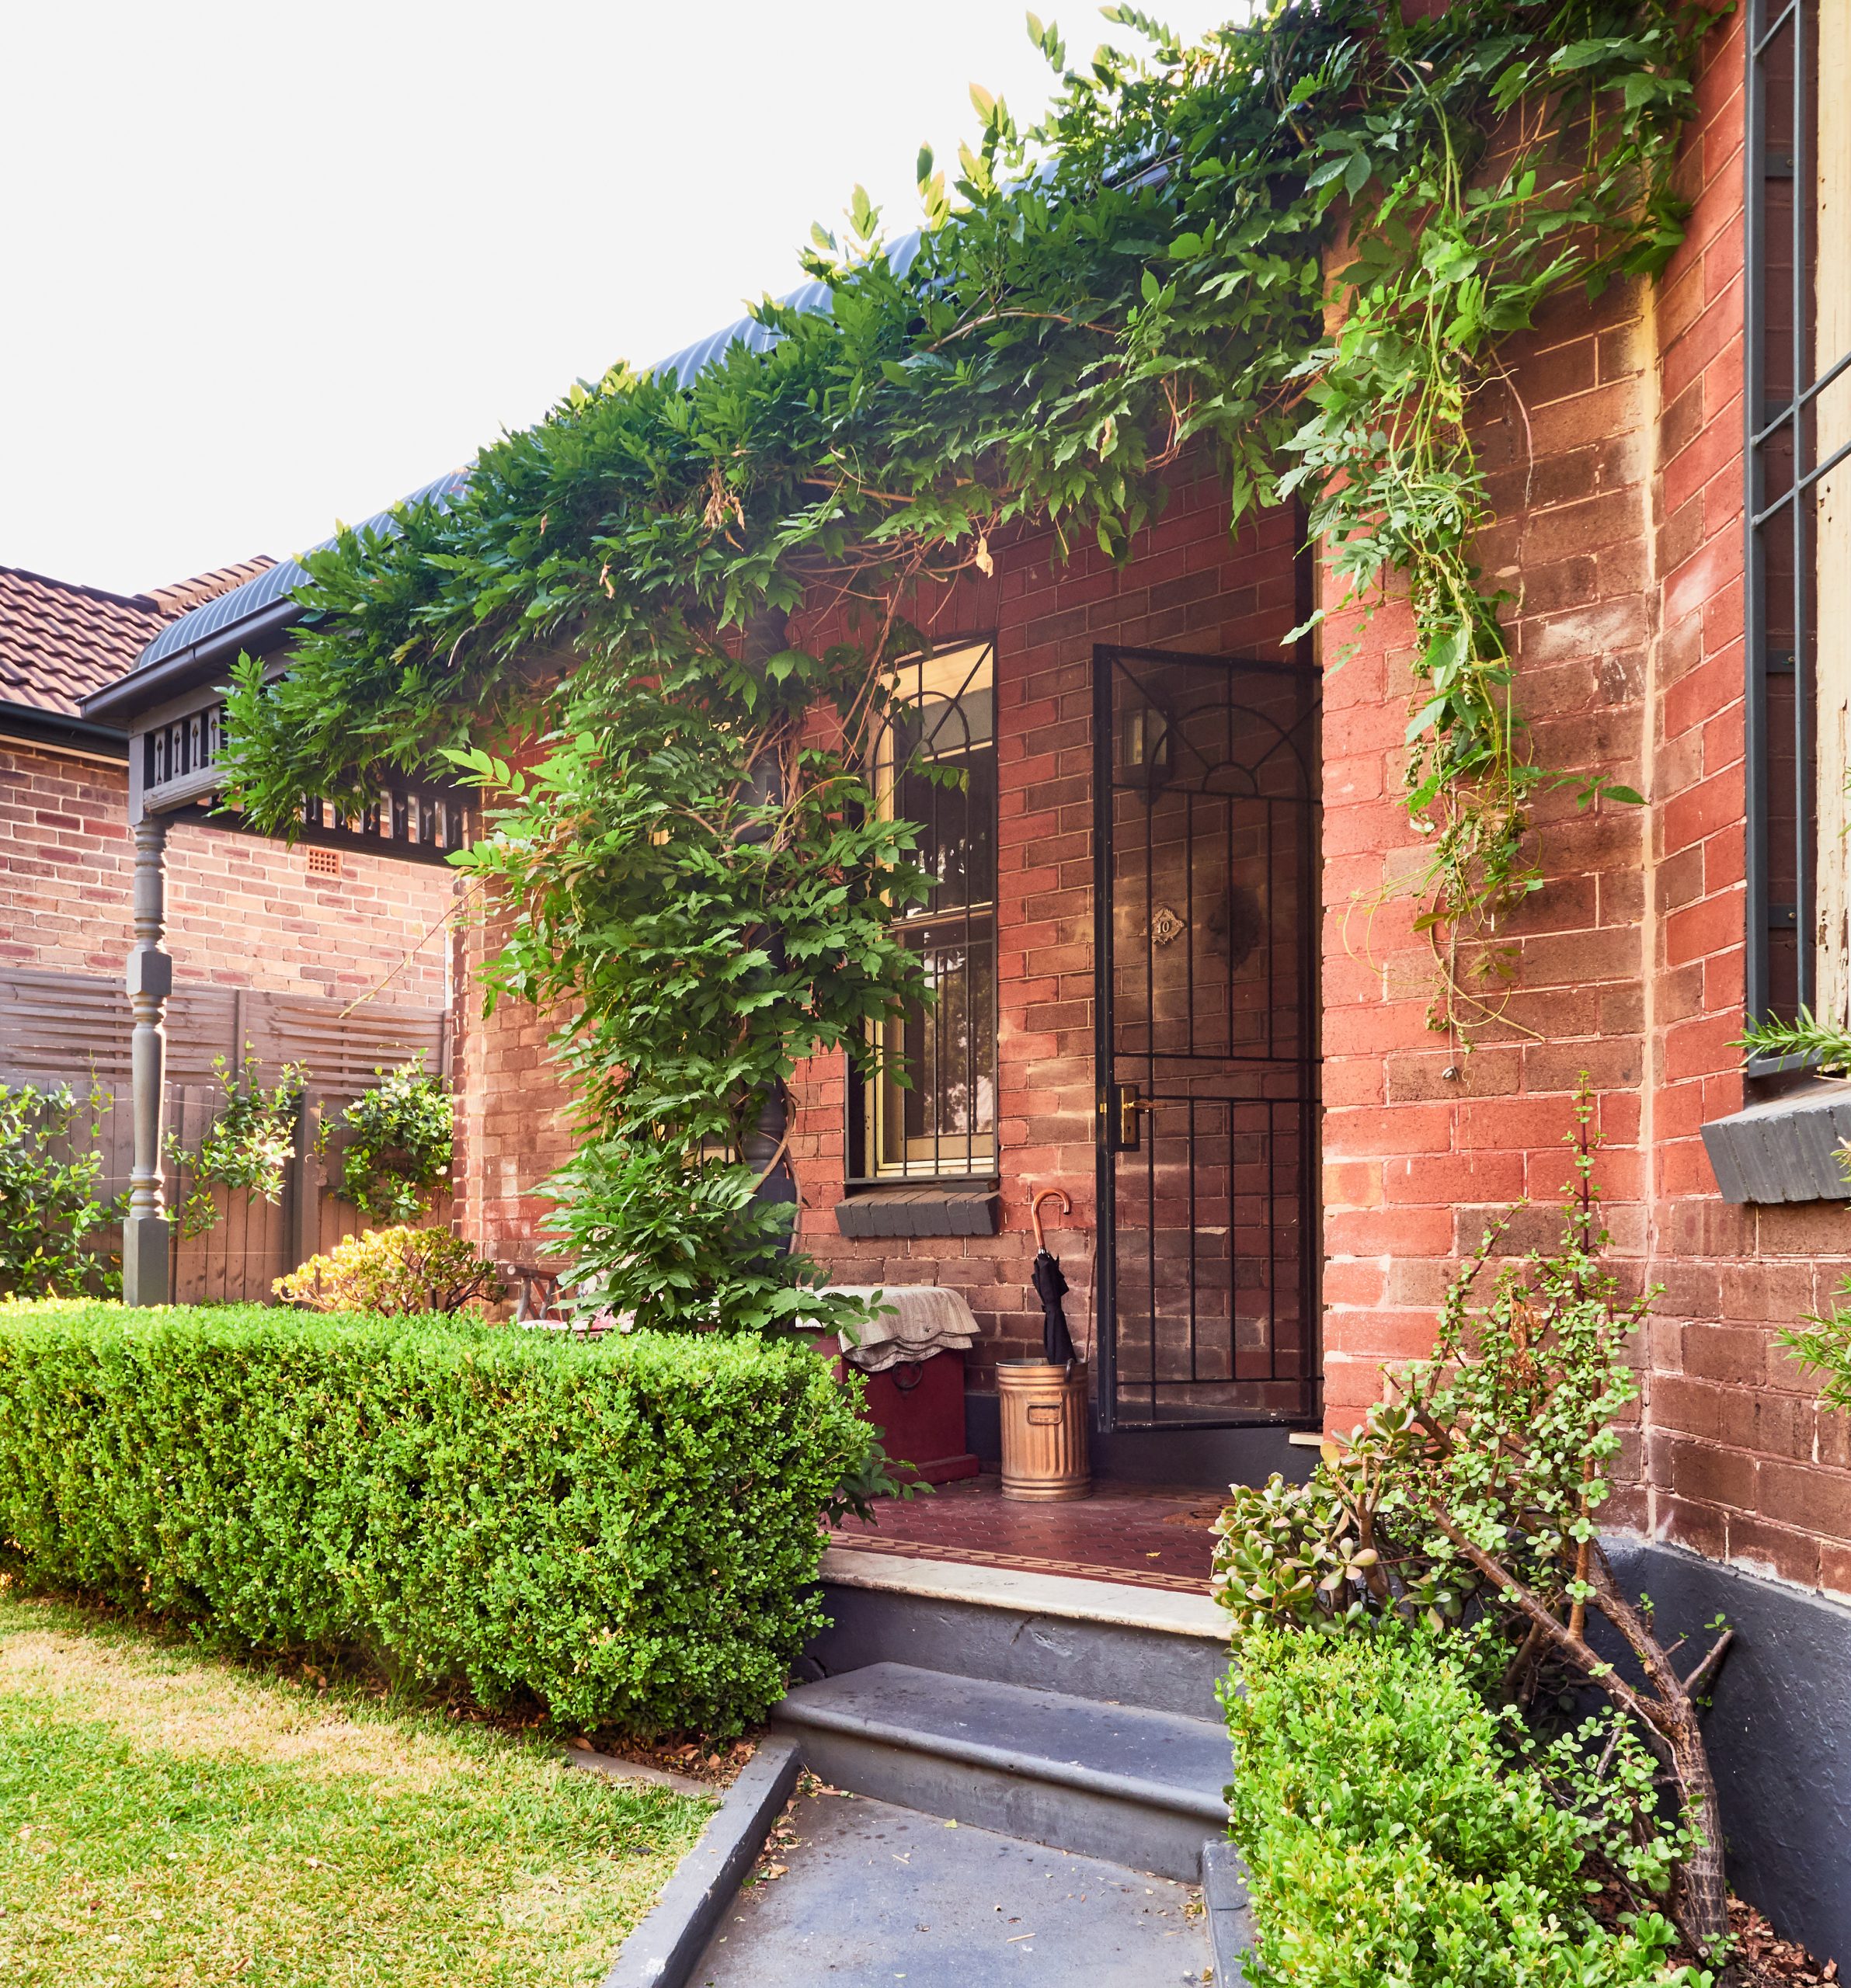 Entrance to red brick home with vines covering the verandah